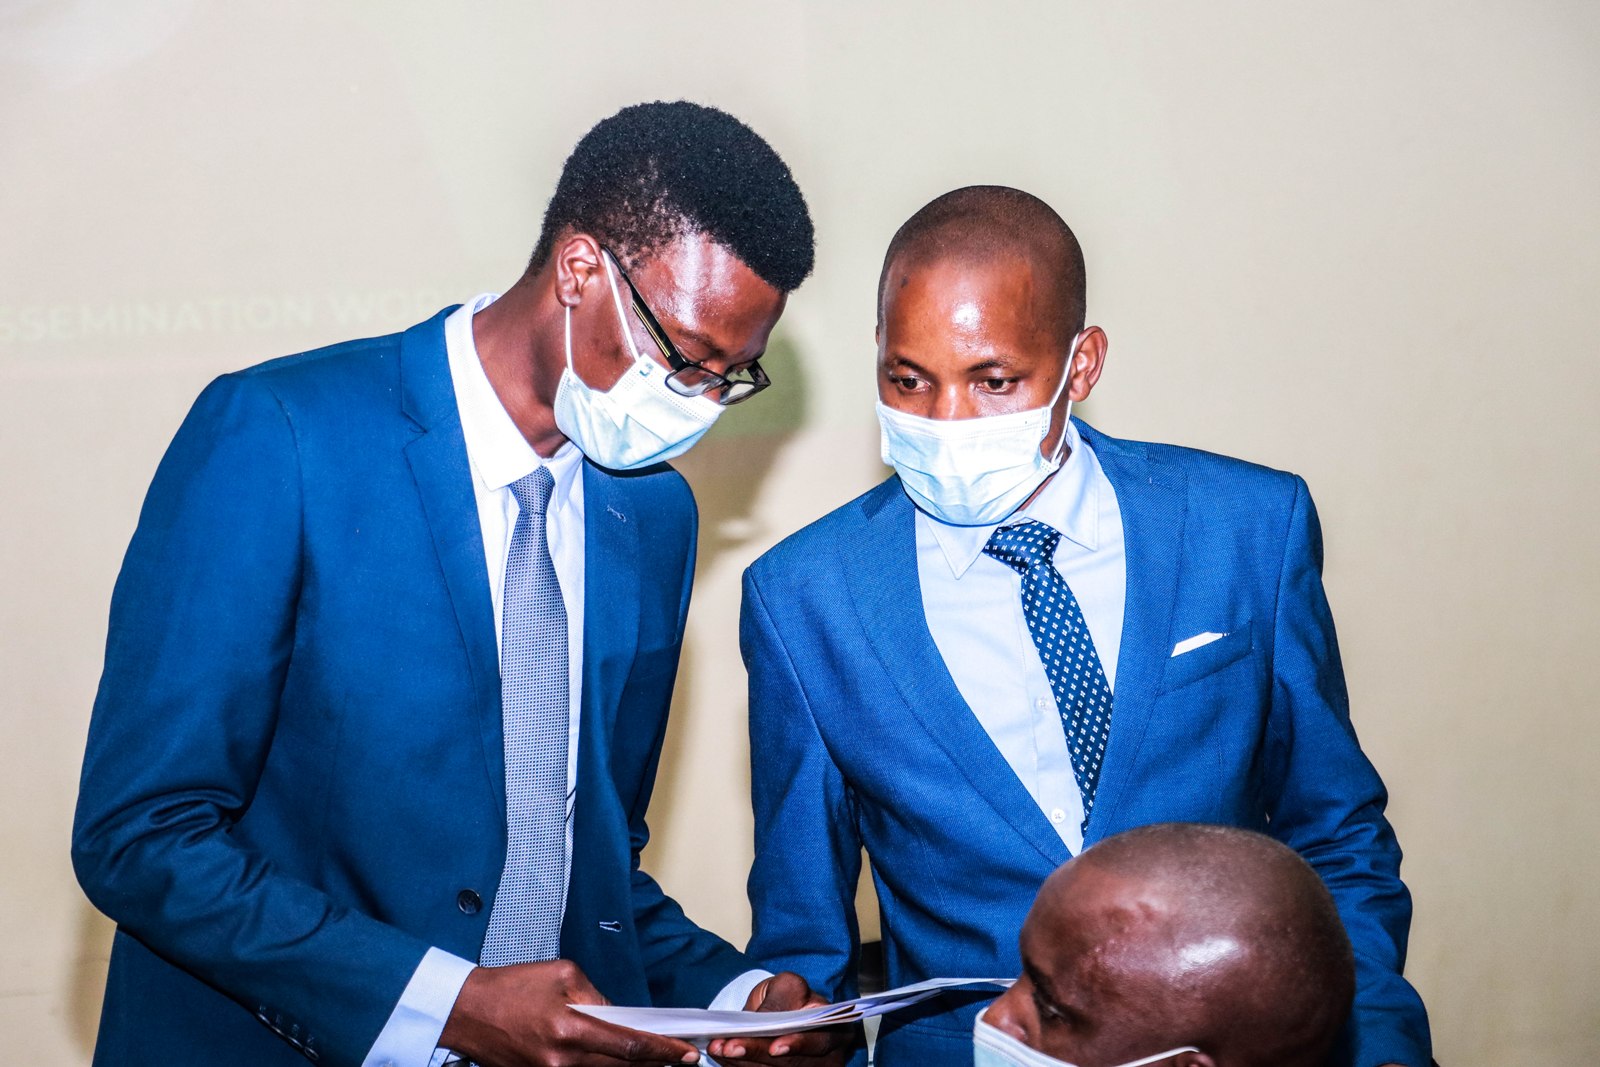 Dr. Rawlance Ndejjo, the SPICES Project Coordinator (L) consults with the PI Dr. Geofrey Musinguzi (R) at the Dissemination workshop held on December 8th 2021 at Colline Hotel, Mukono.